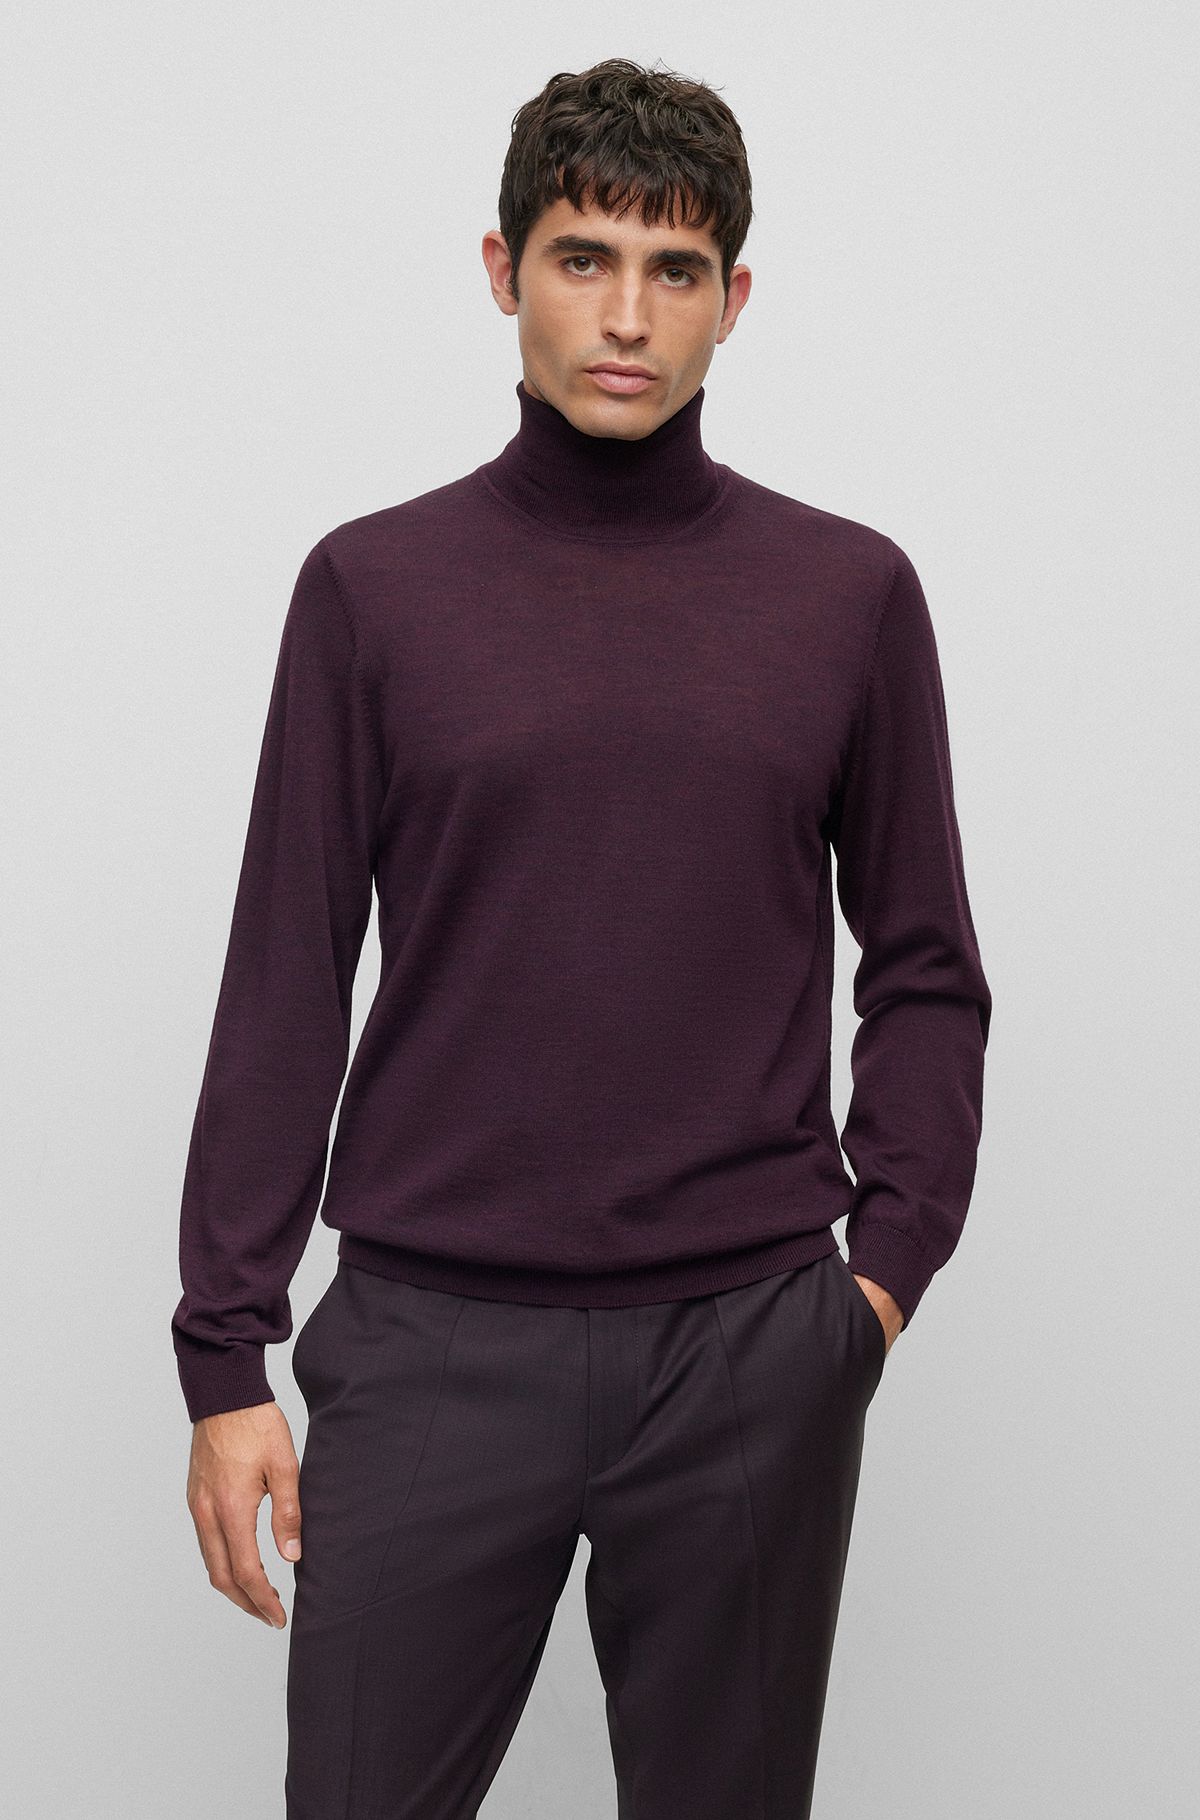 Sweaters in Red by HUGO BOSS |